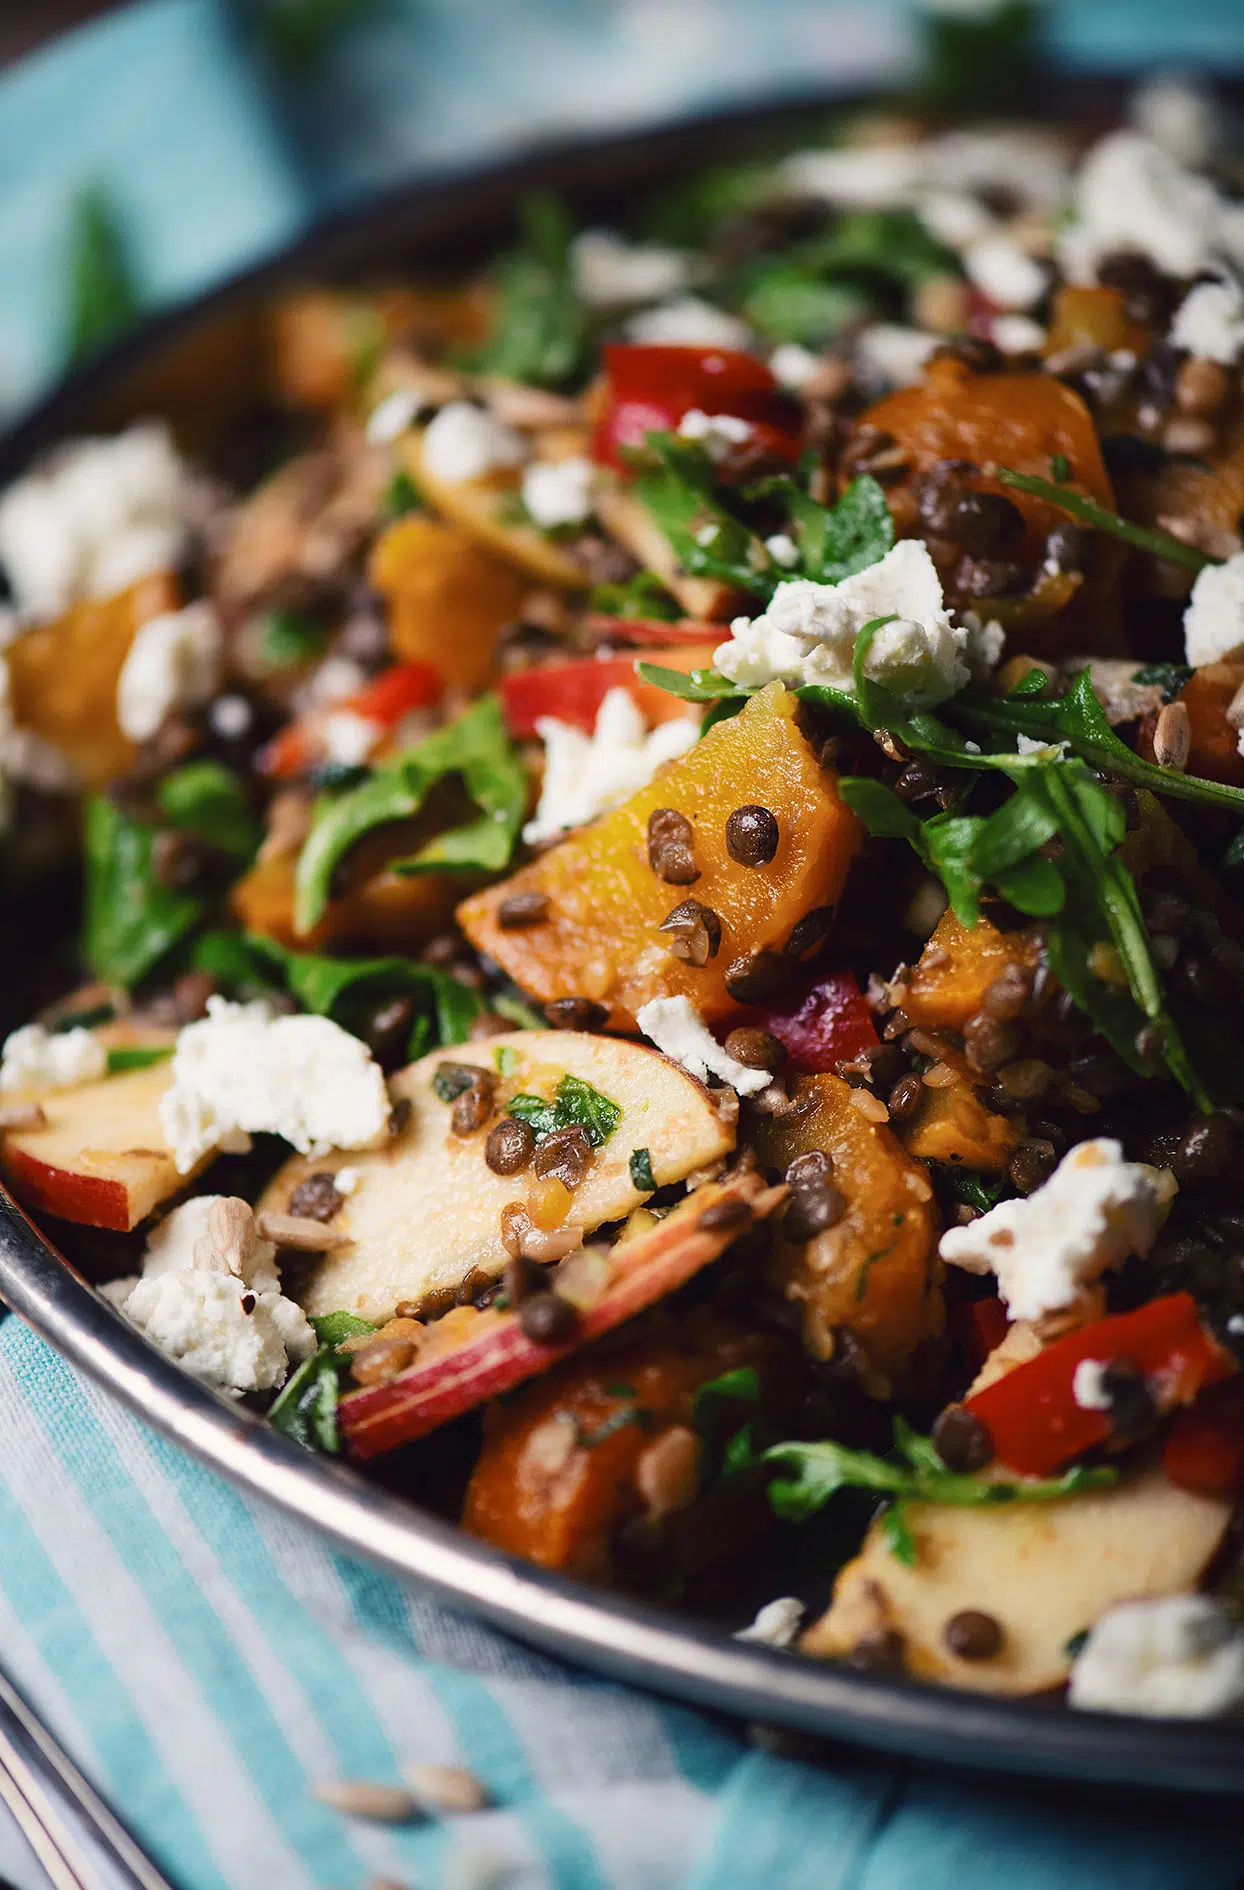 Lentil, apple and beet salad with goat cheese